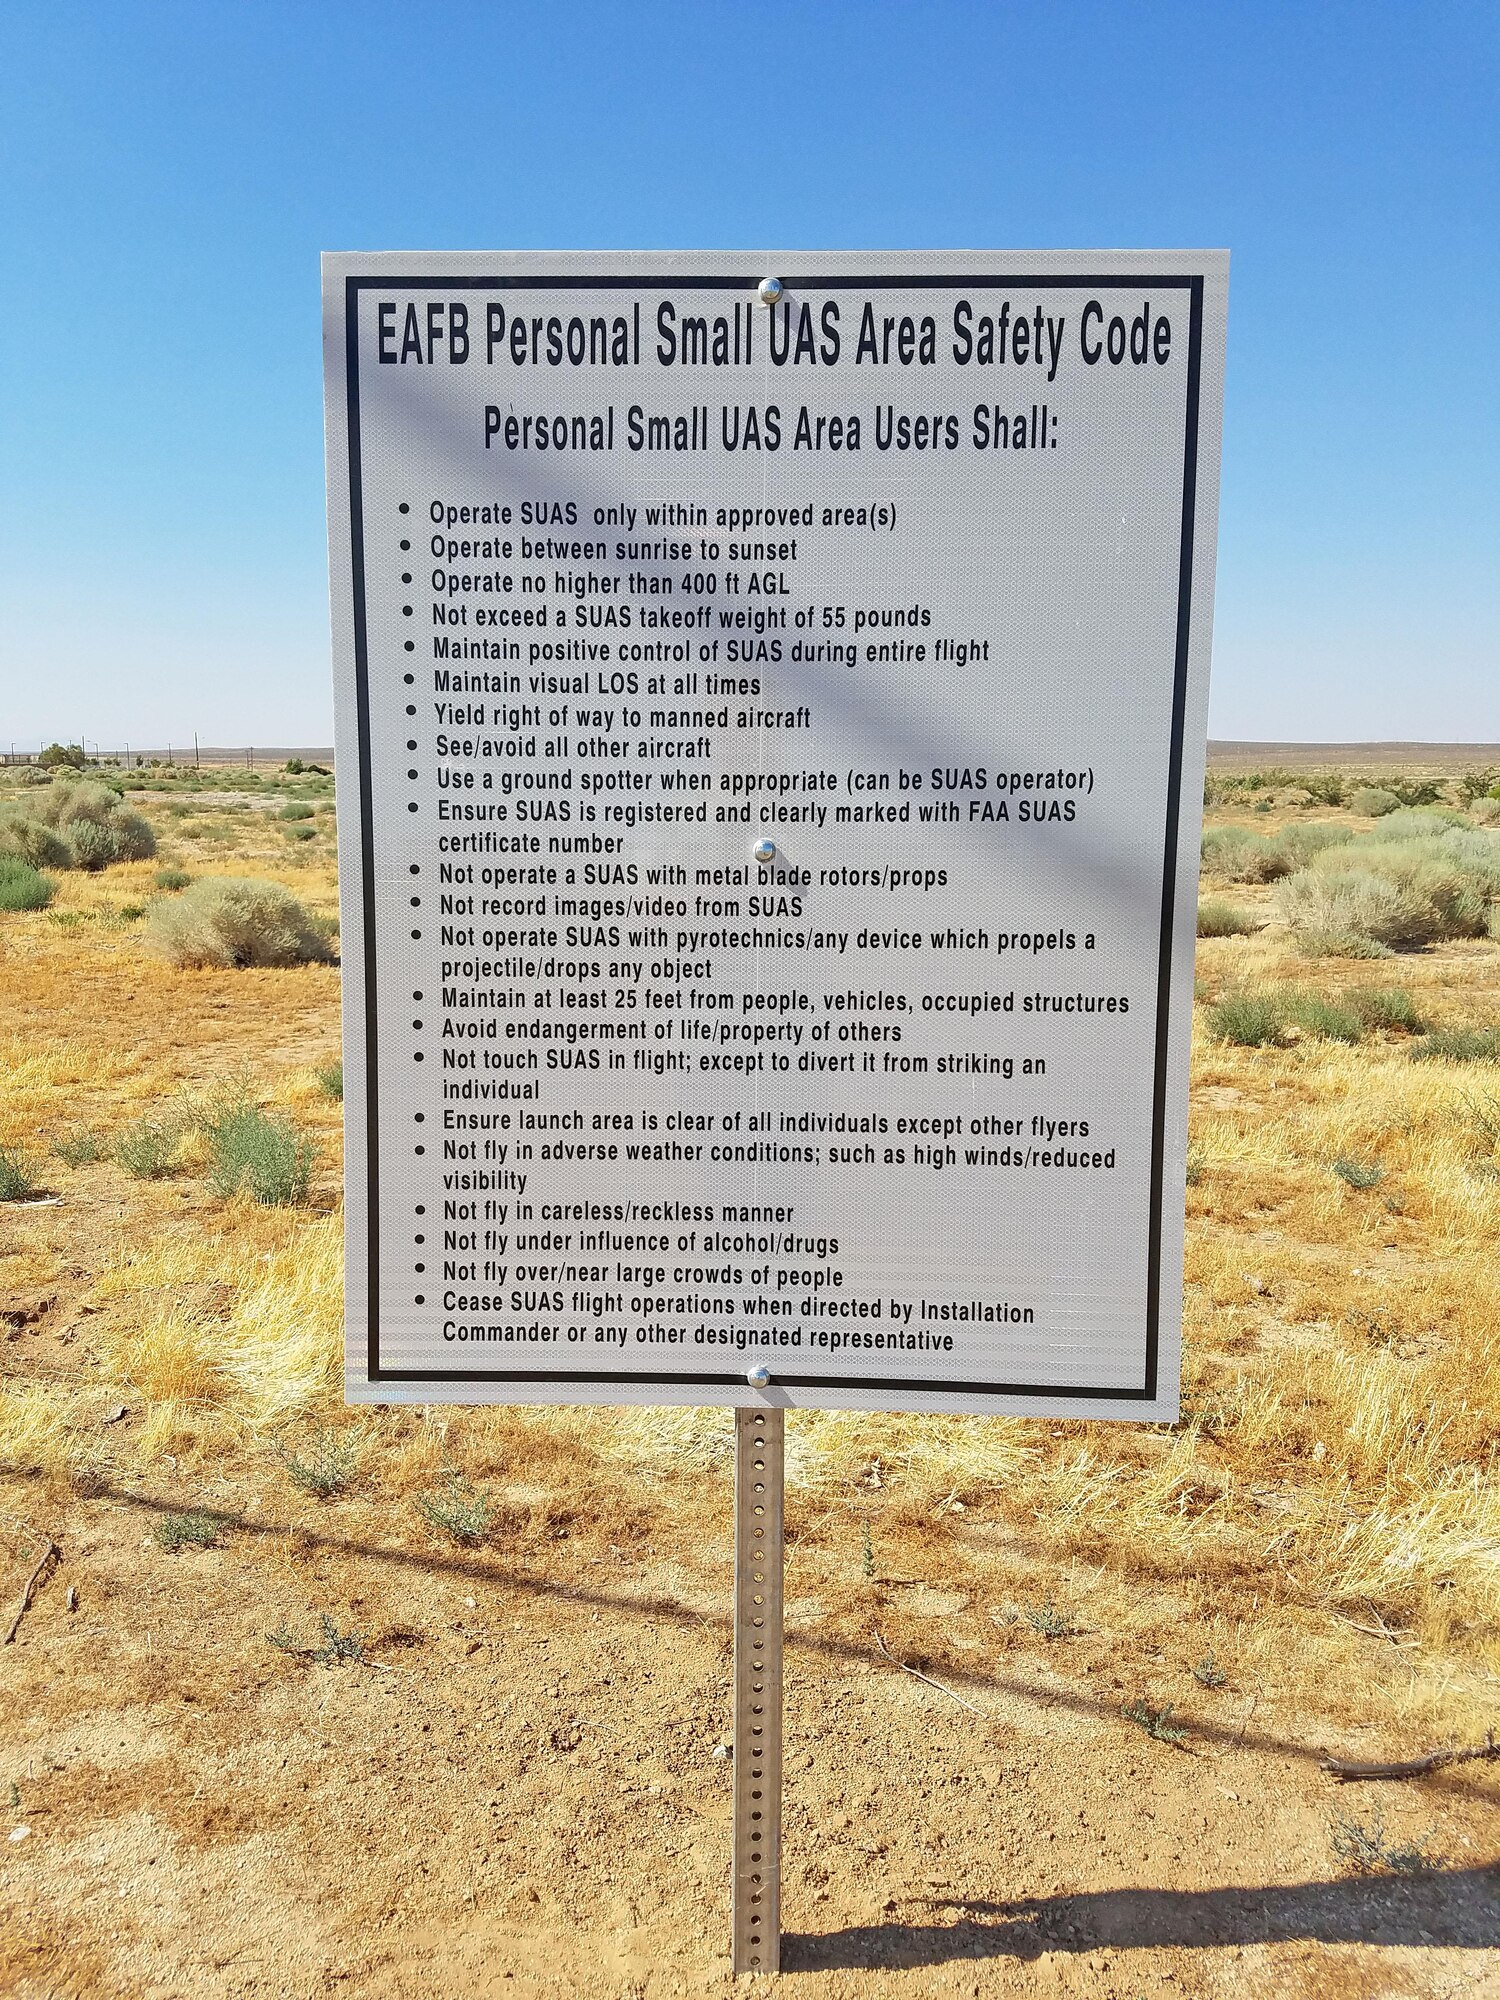 The User’s Safety Code is posted at the new Edwards AFB Personal Small UAS Area. (U.S. Air Force photo by Ed Buclatin)